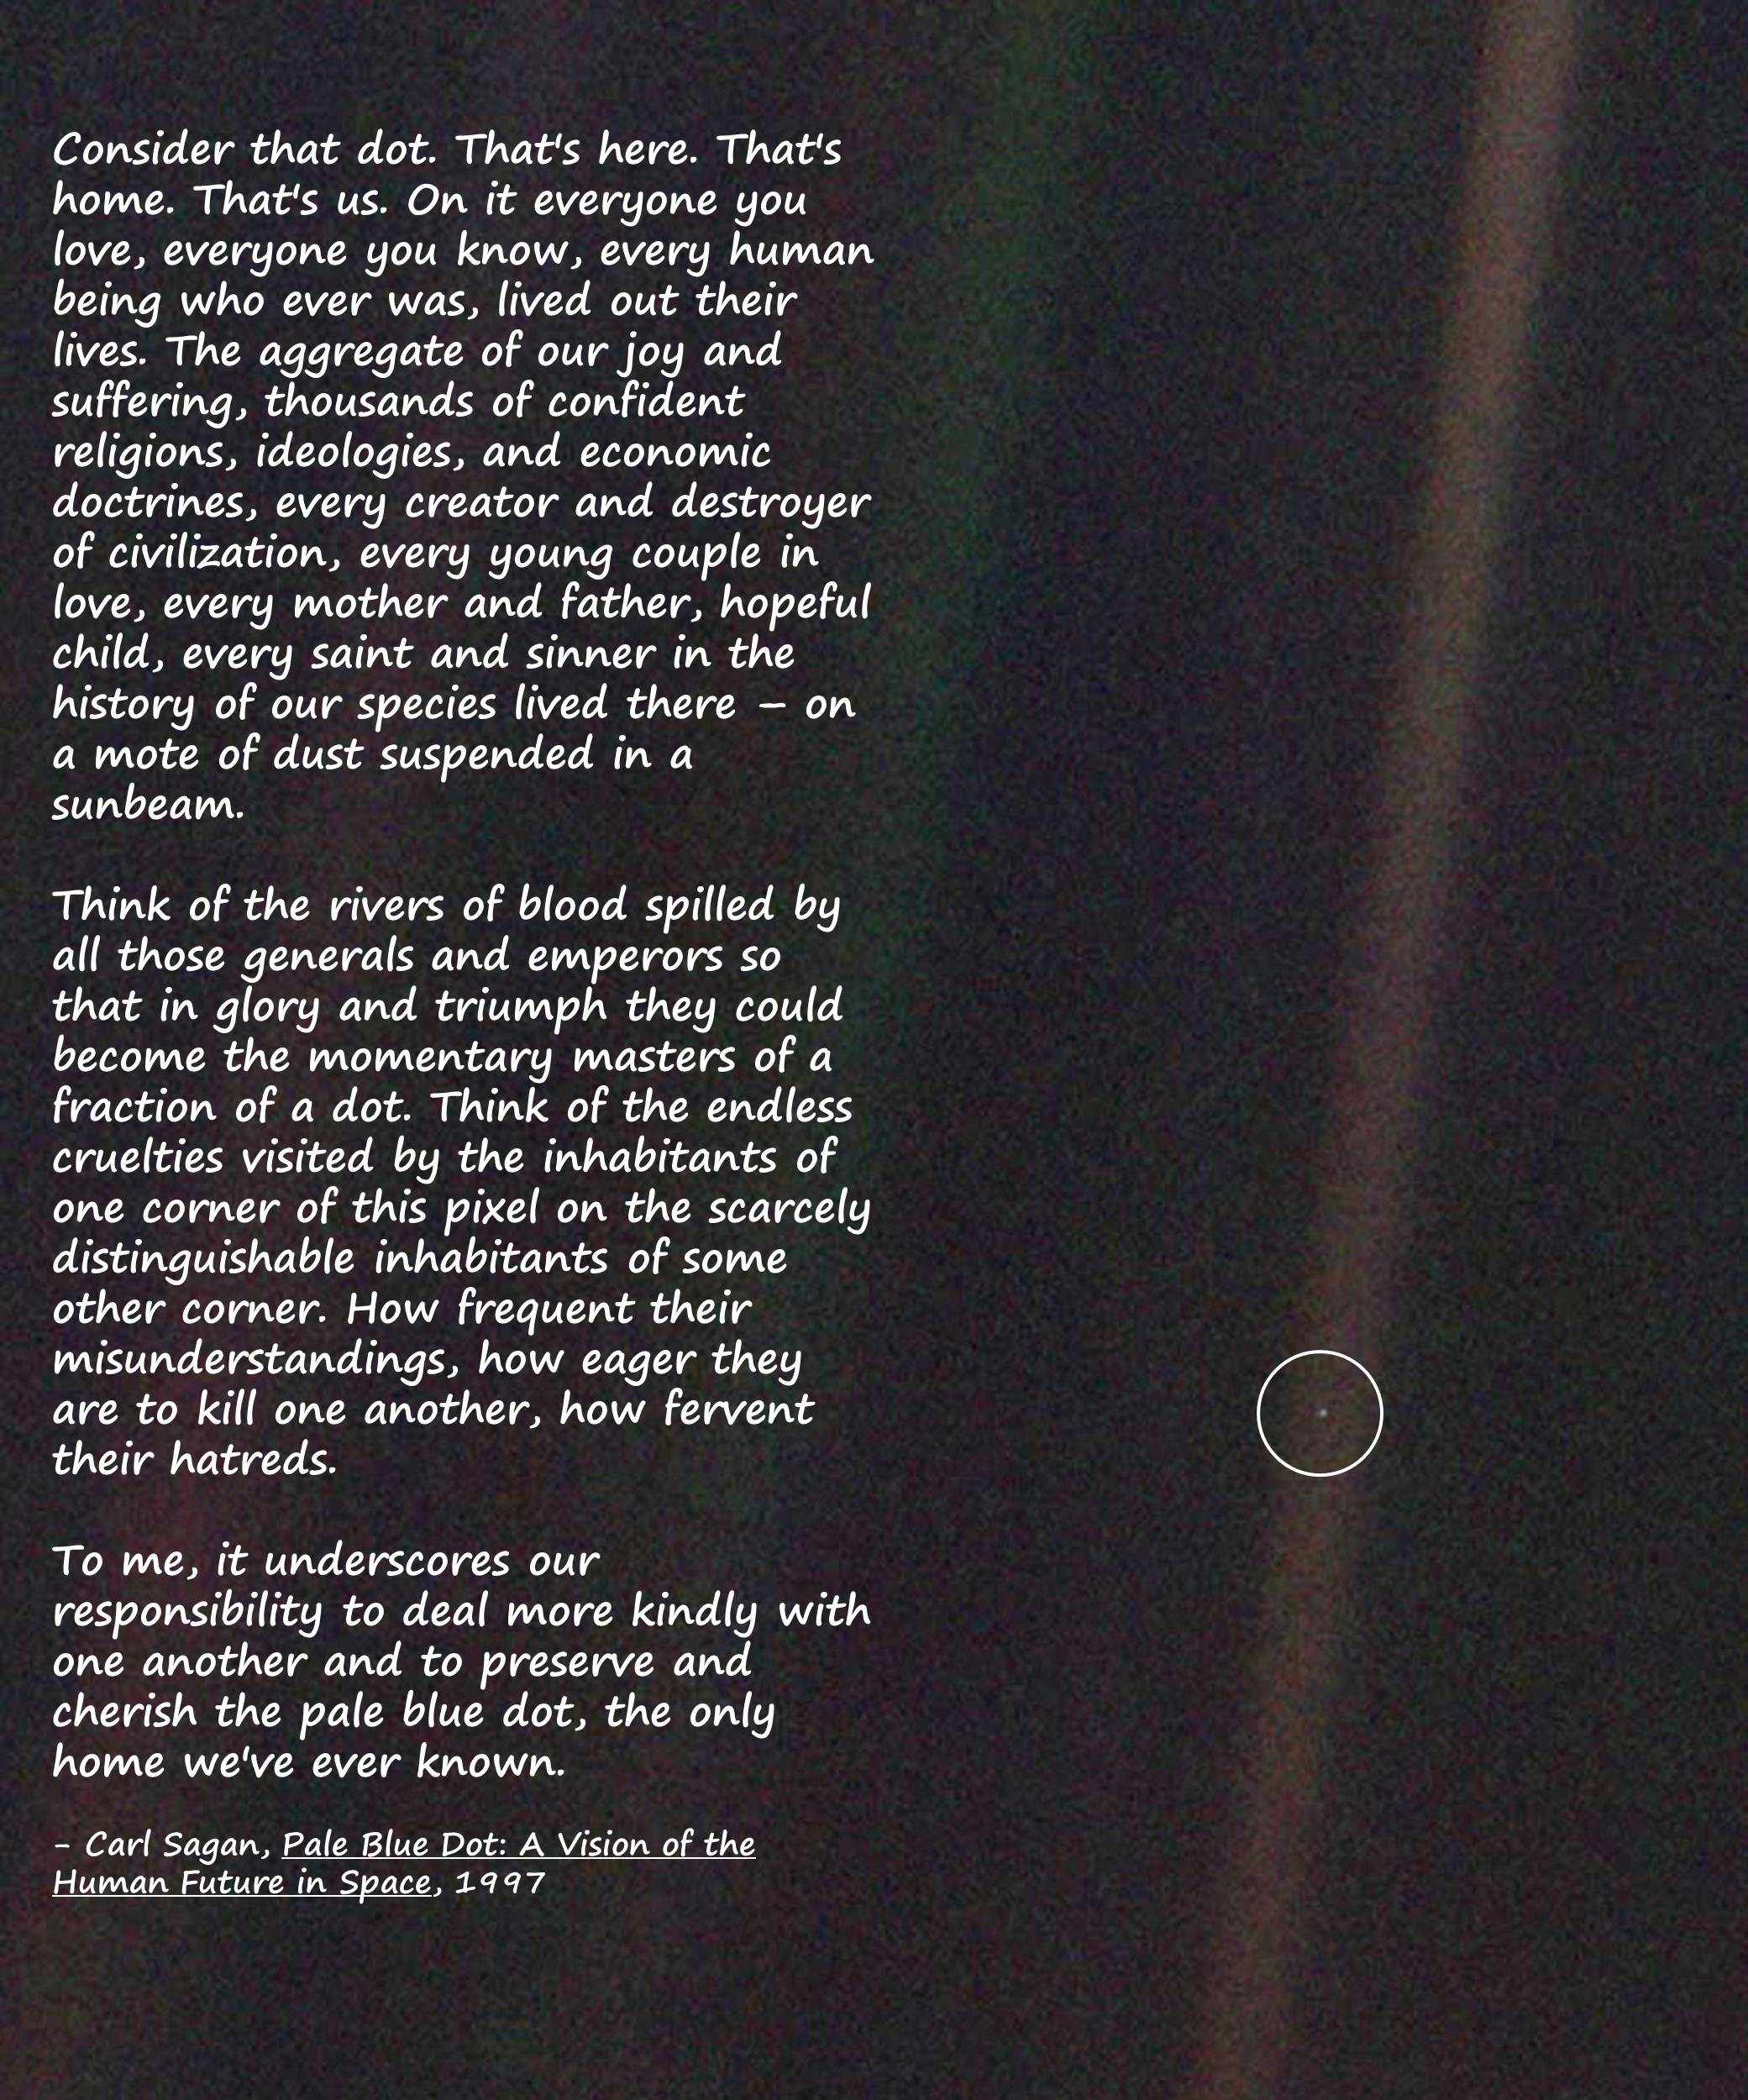 Pale blue dot – The Intrepid Mathematician